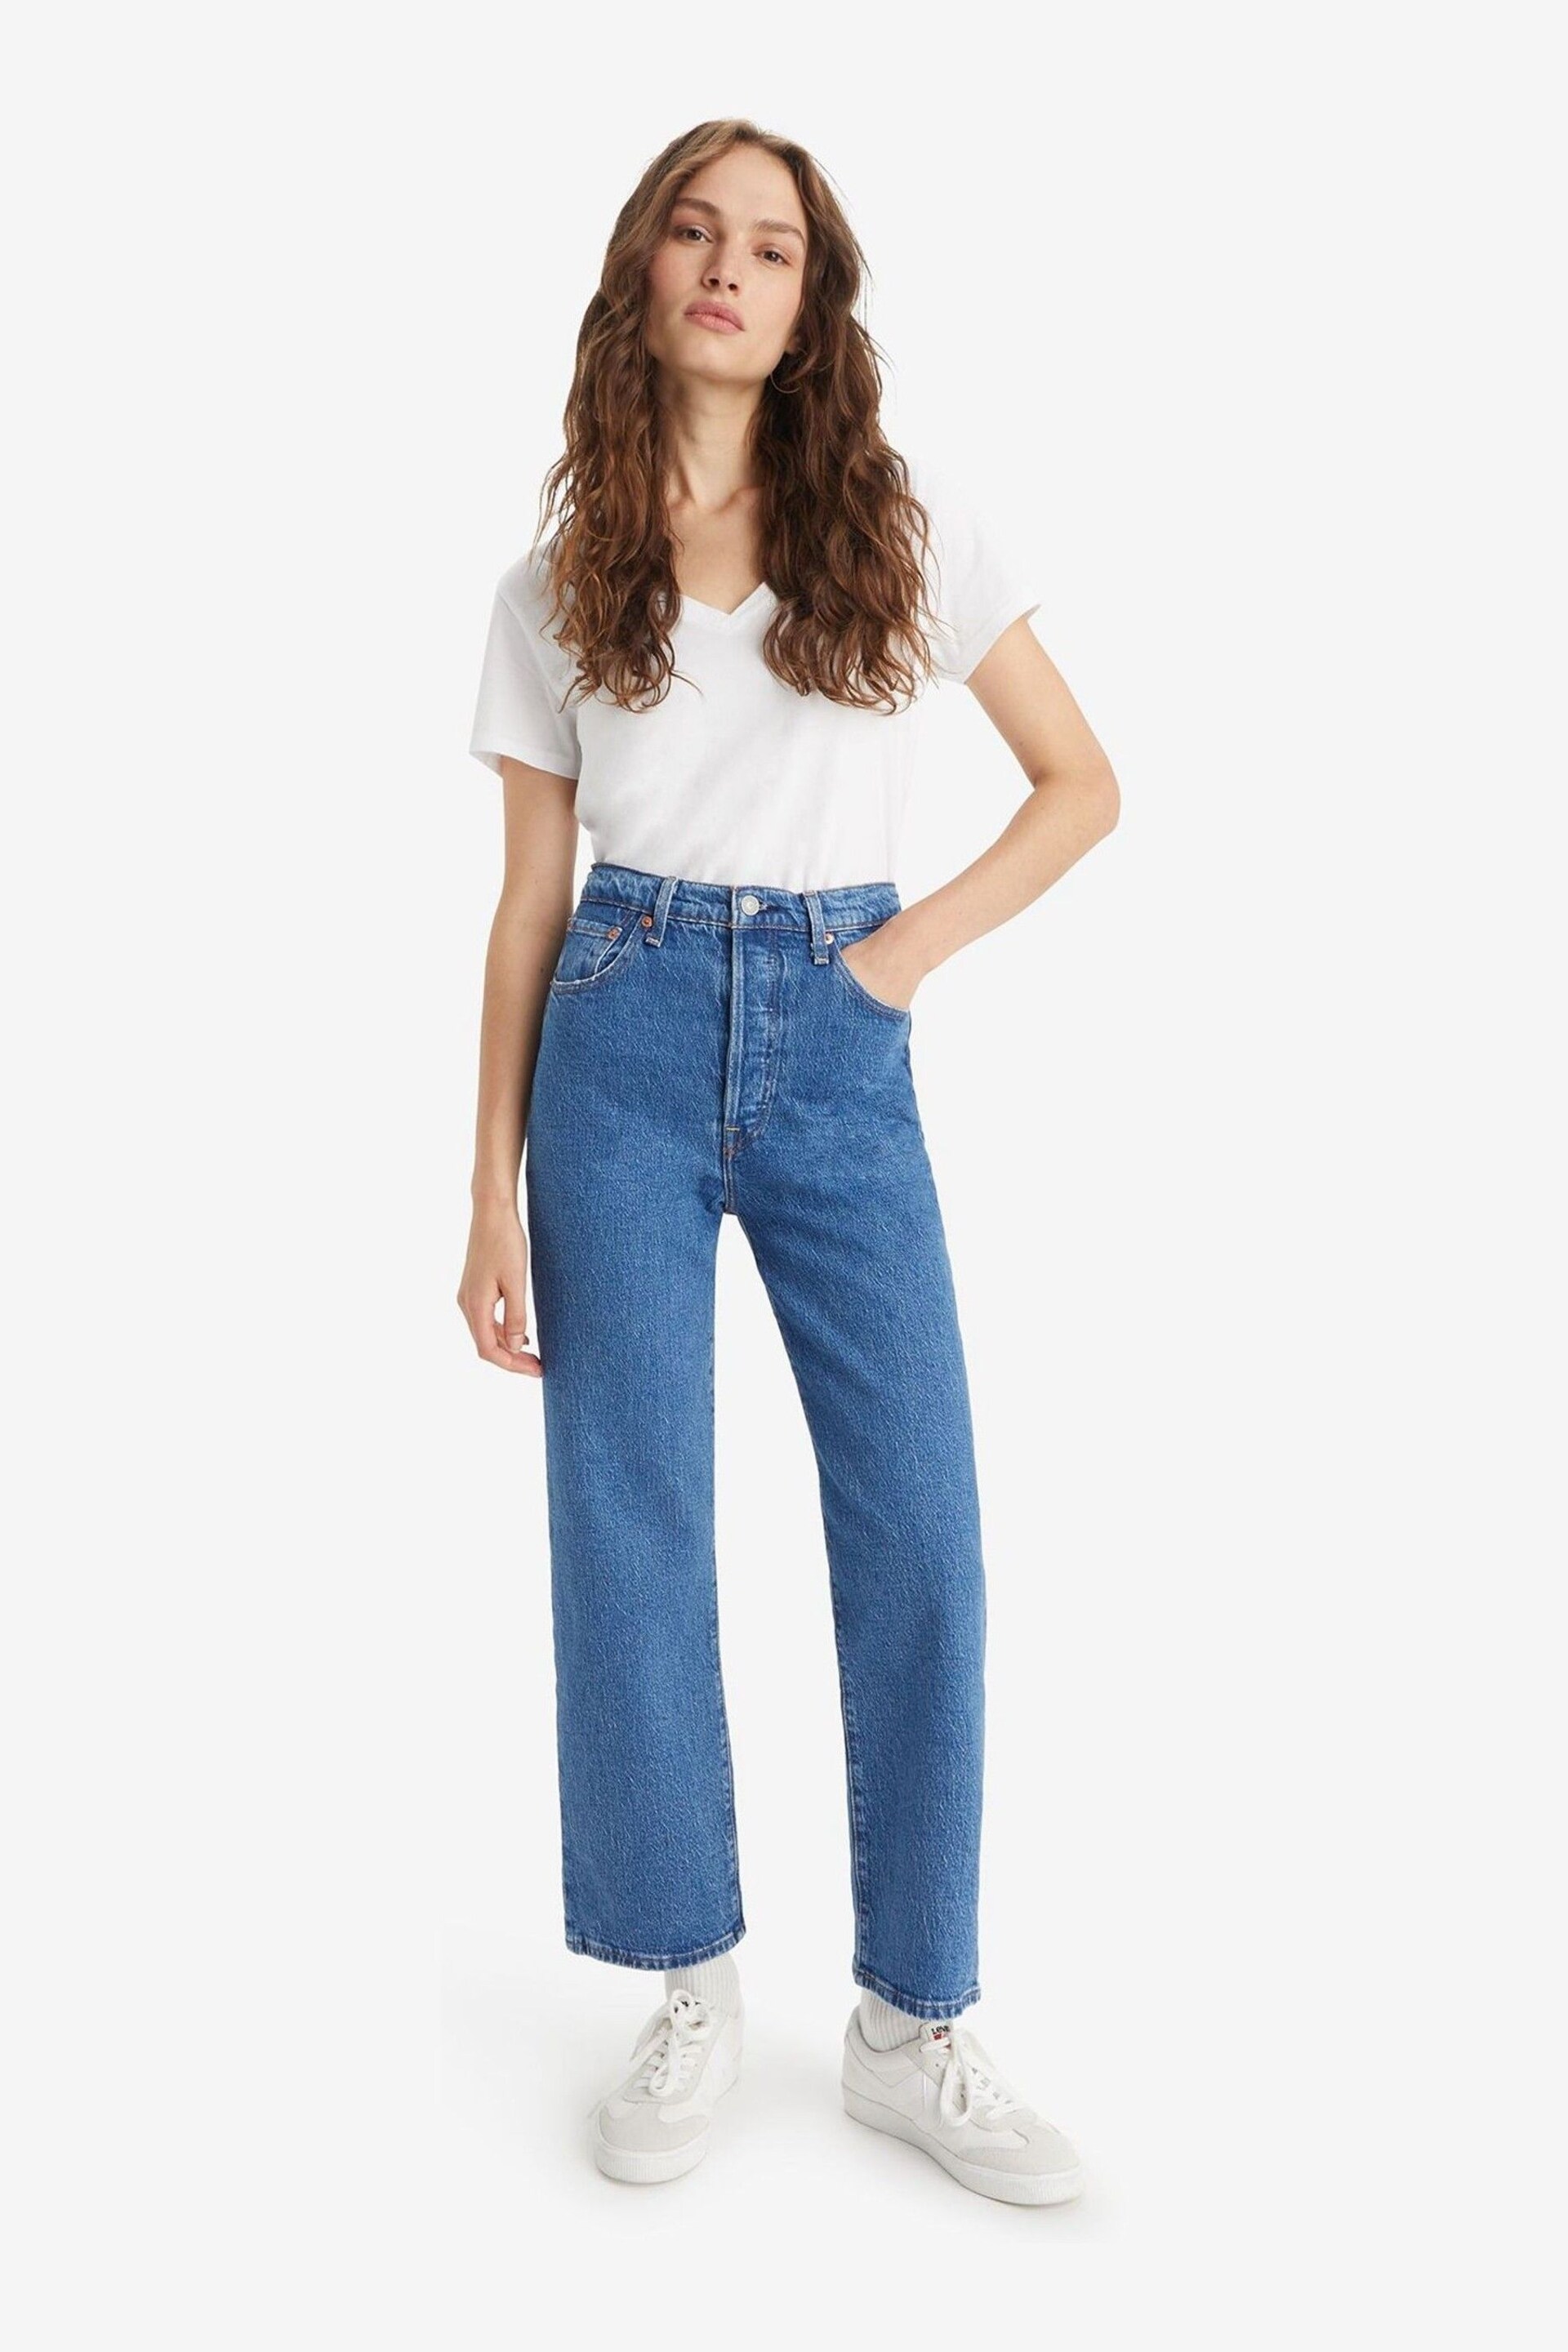 Levi's® Jazz Pop Ribcage Straight Ankle Jeans - Image 4 of 14